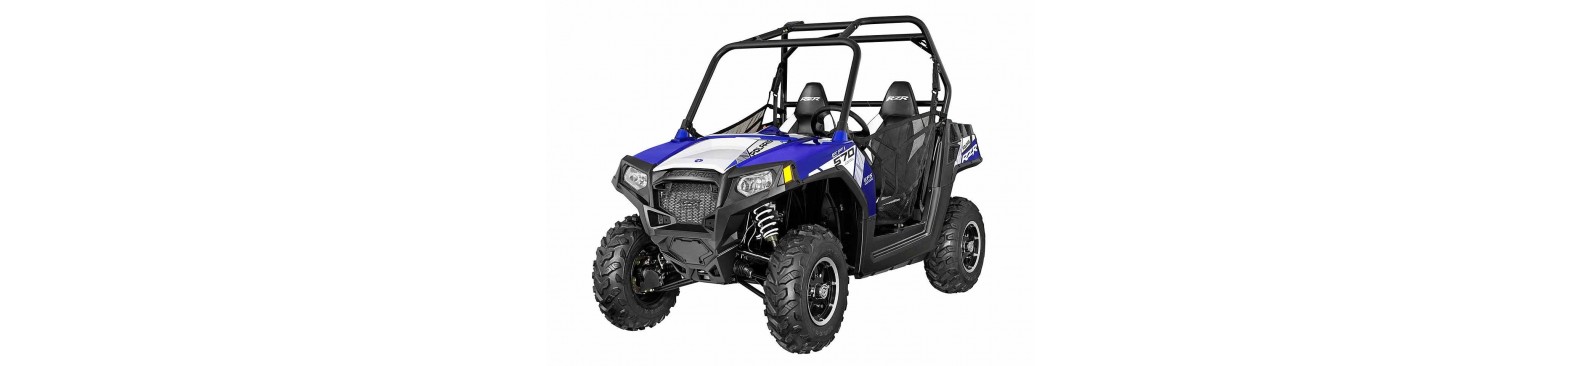 Stock and aftermarket parts for your polaris RZR 570